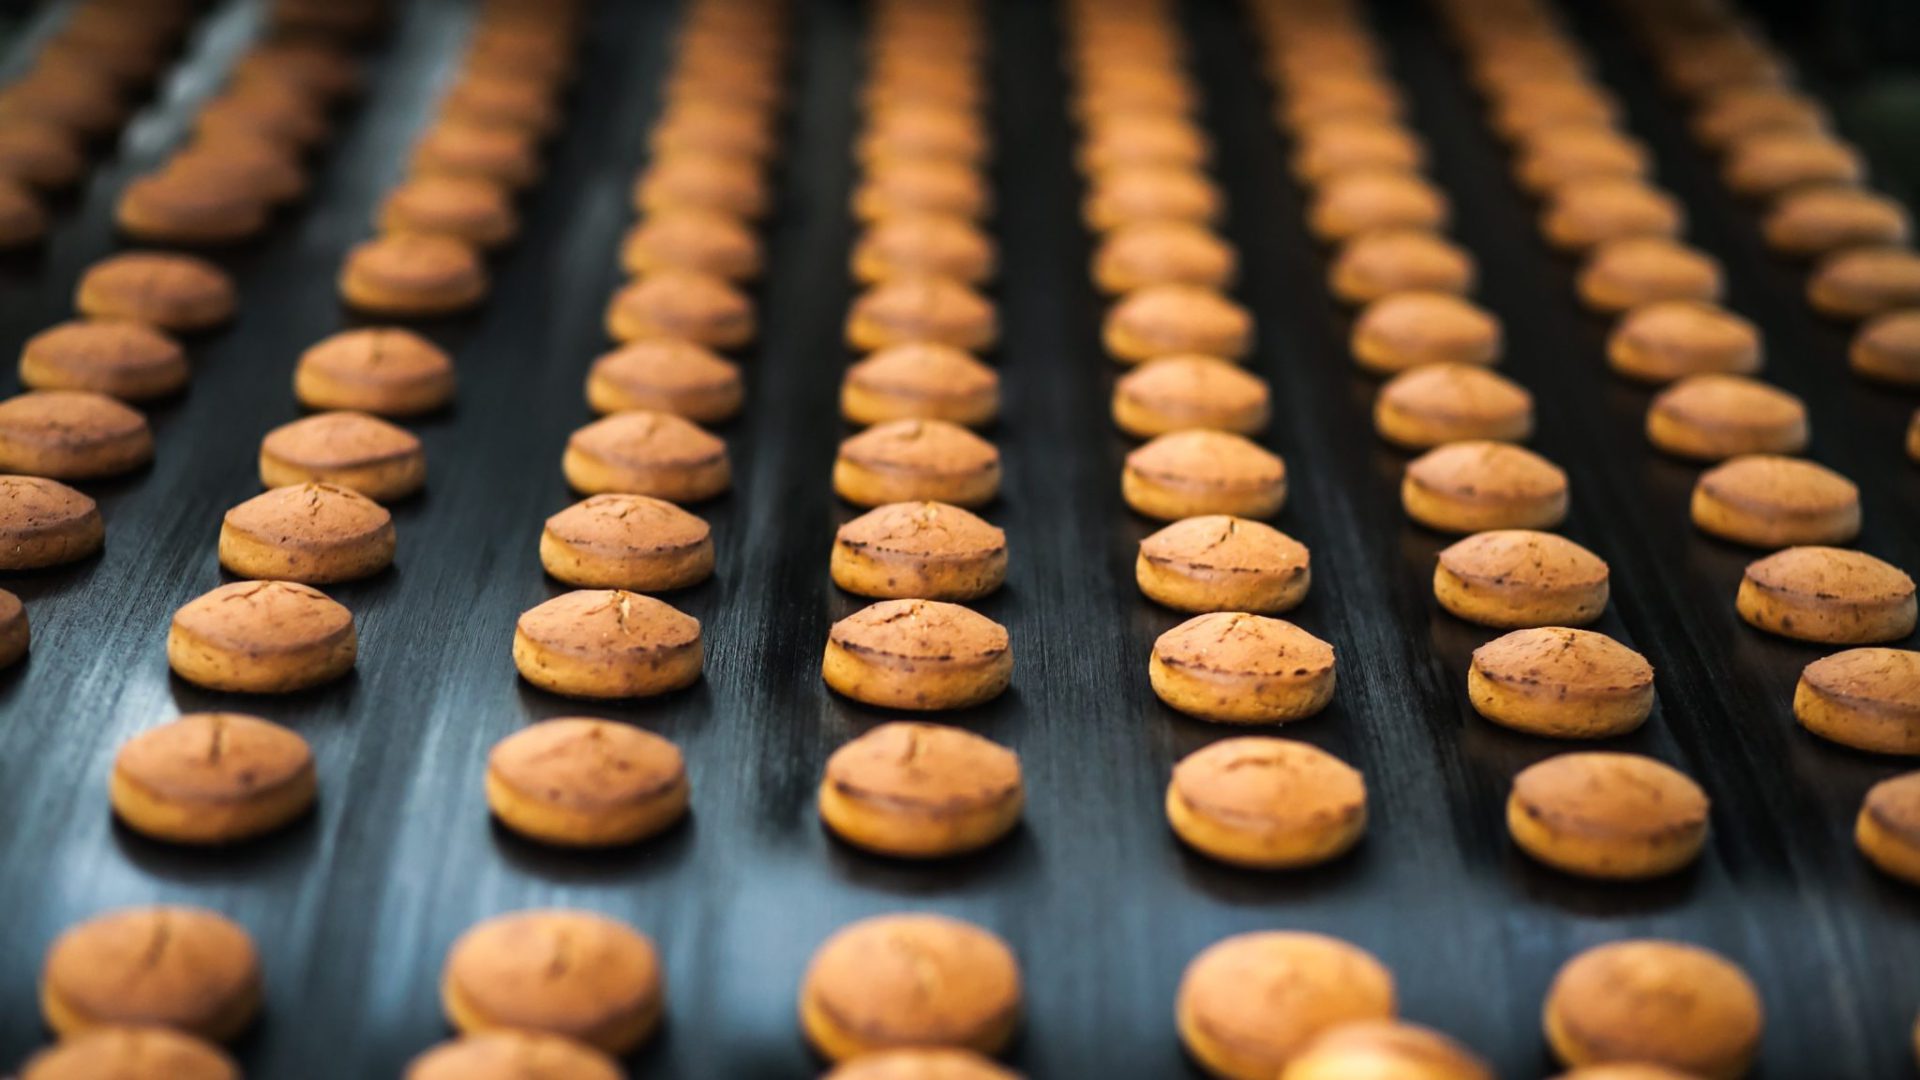 Rows of cookies on a black surface, illustrating the concept of leveraging Industry 4.0 and smart manufacturing in the food & beverage industry for digital transformation.